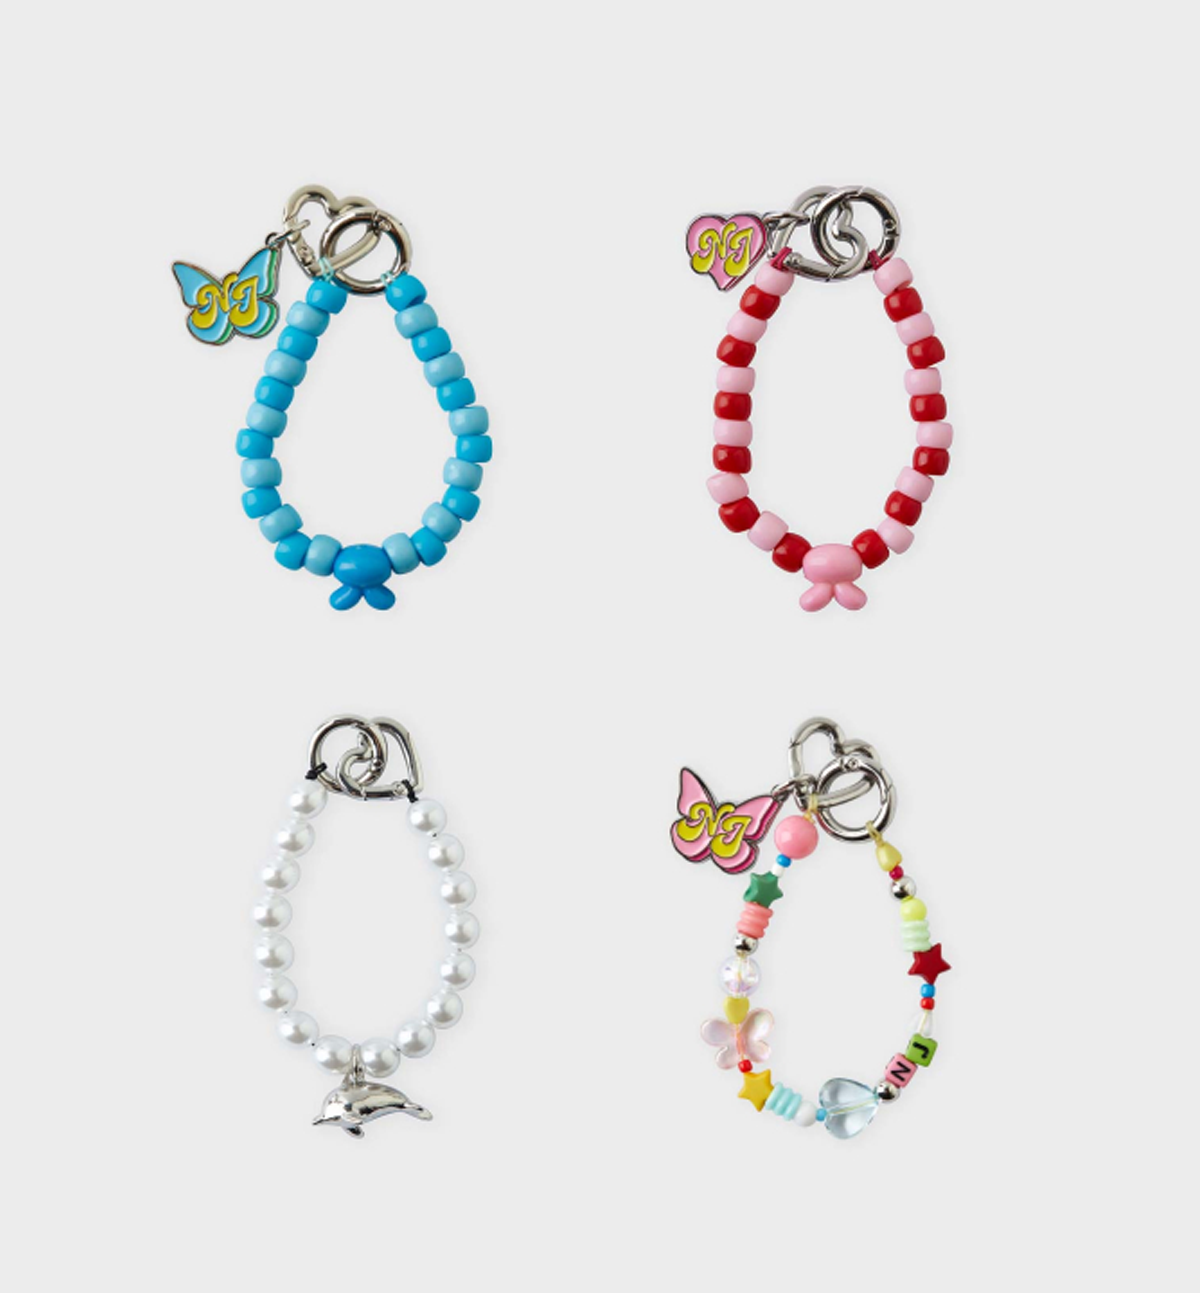 NewJeans Get Up Beads Charm Keyring [Limited Edition]